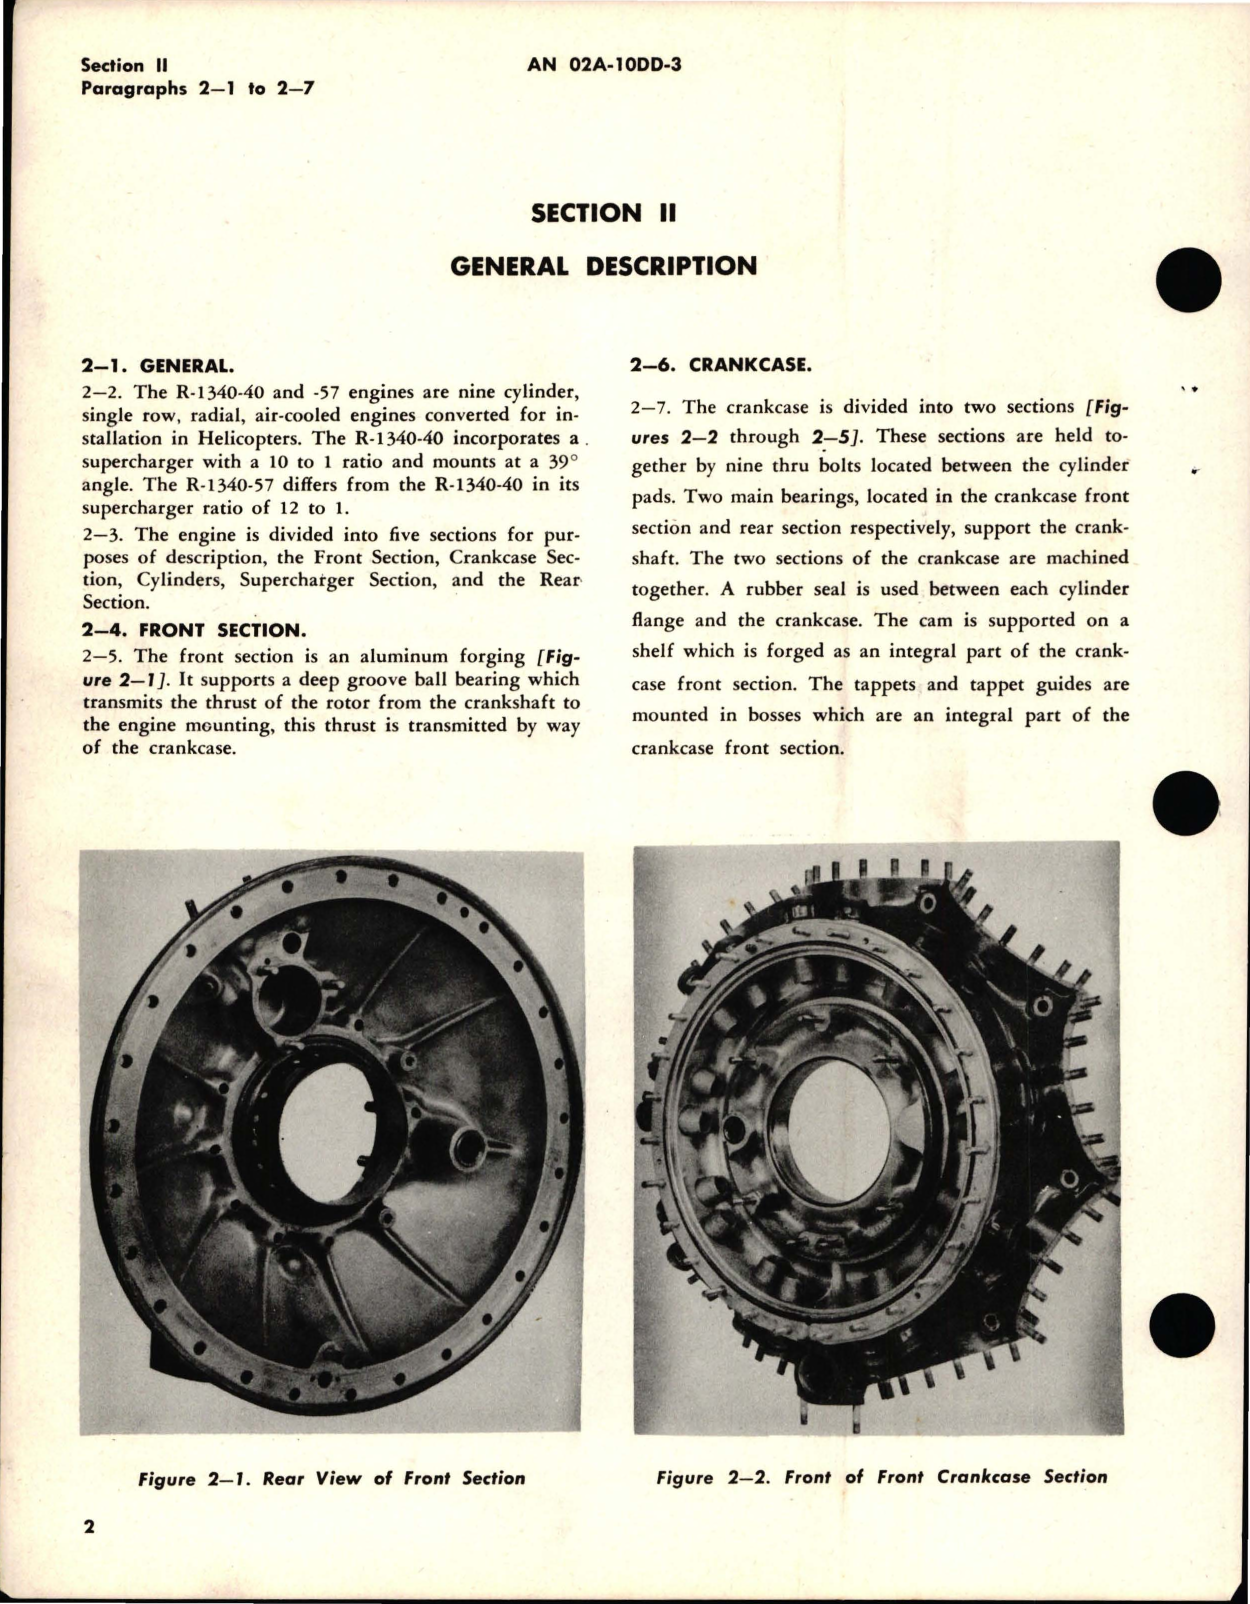 Sample page 8 from AirCorps Library document: Overhaul Instructions for R-1340-40 and R-1340-57 Engines